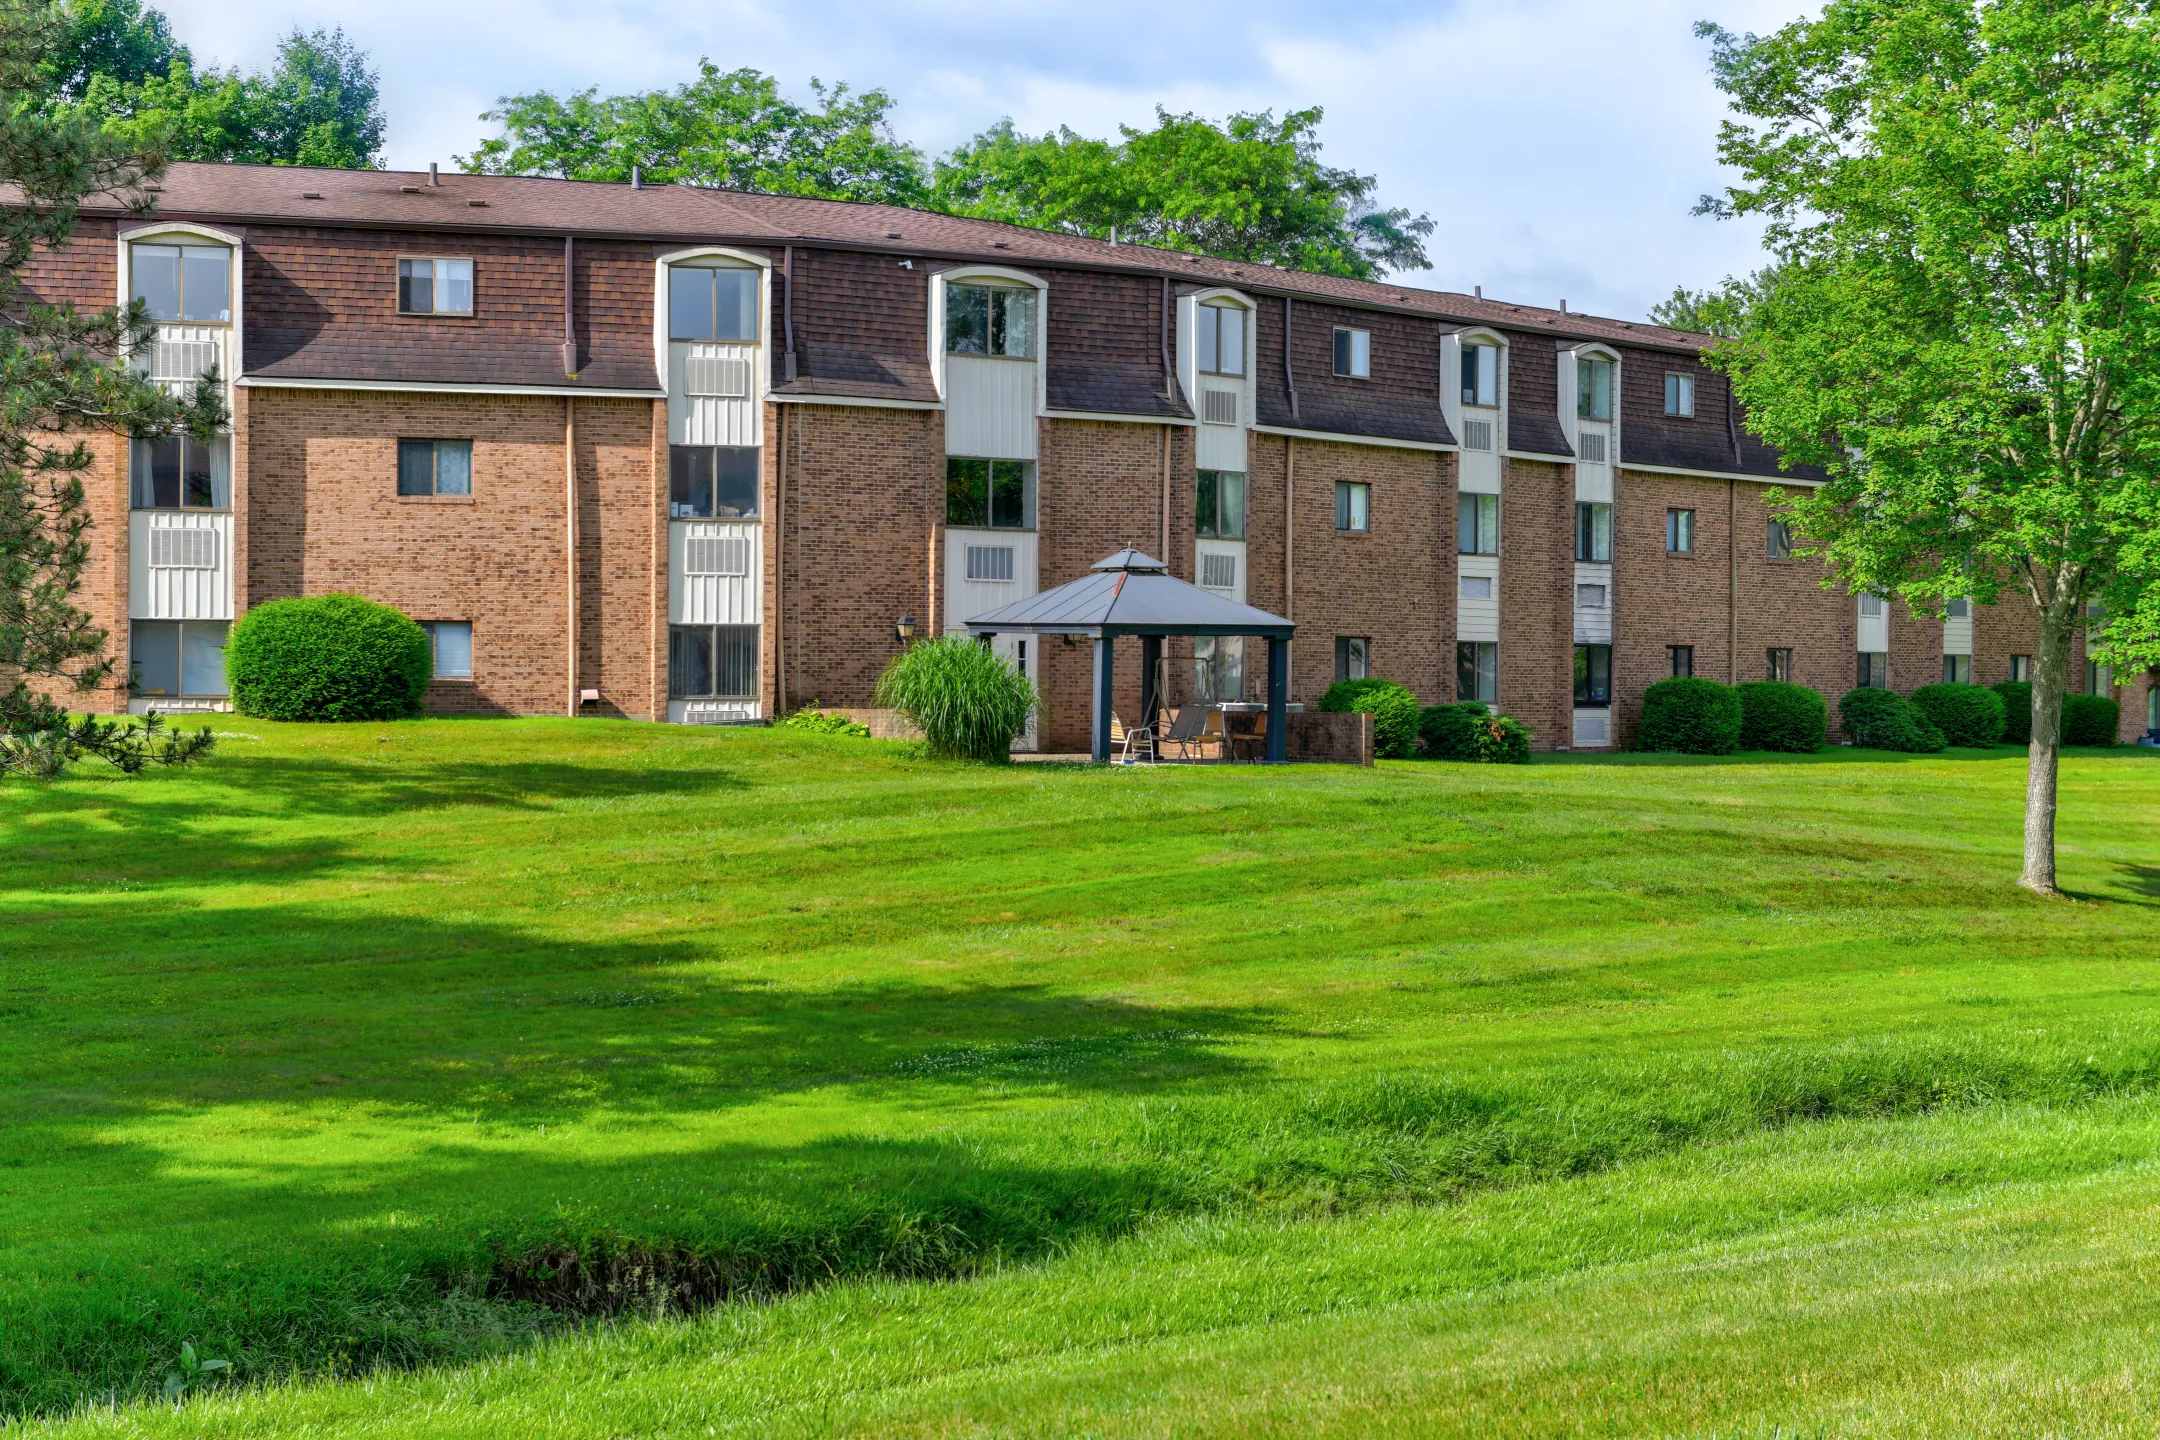 Building - Mapleview Colony Terrace Family and Senior Living - Zanesville, OH